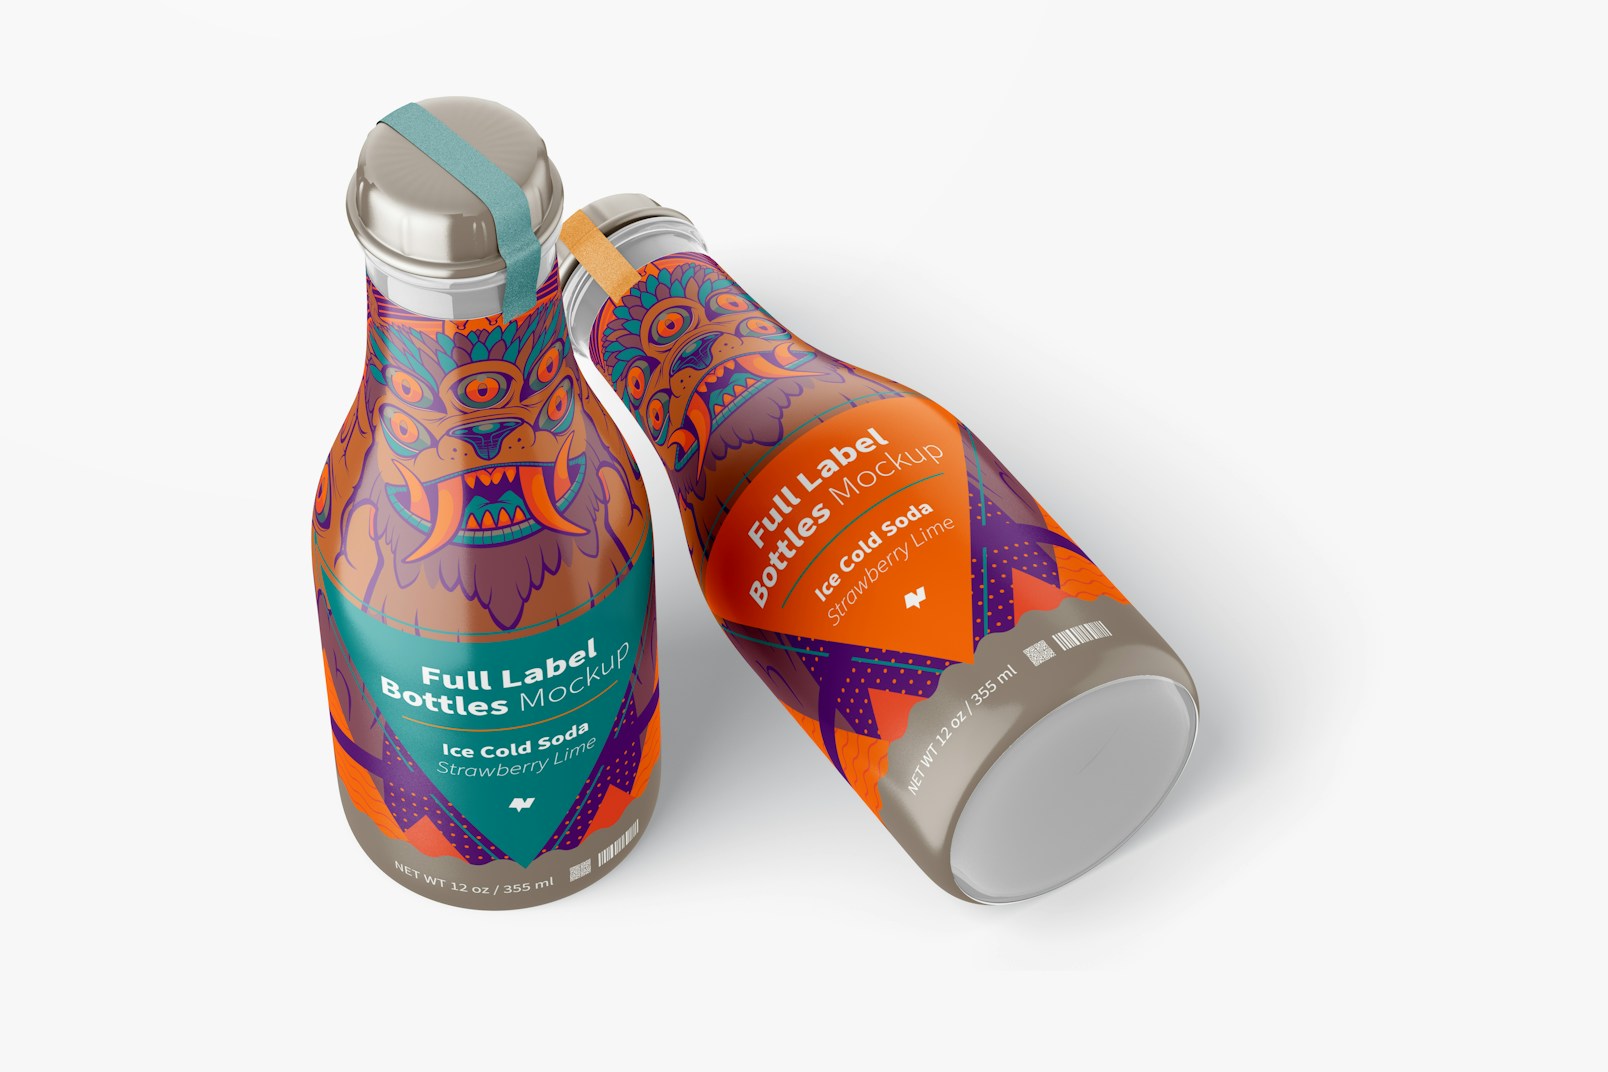 12 Oz Full Label Bottles Mockup, Standing and Dropped